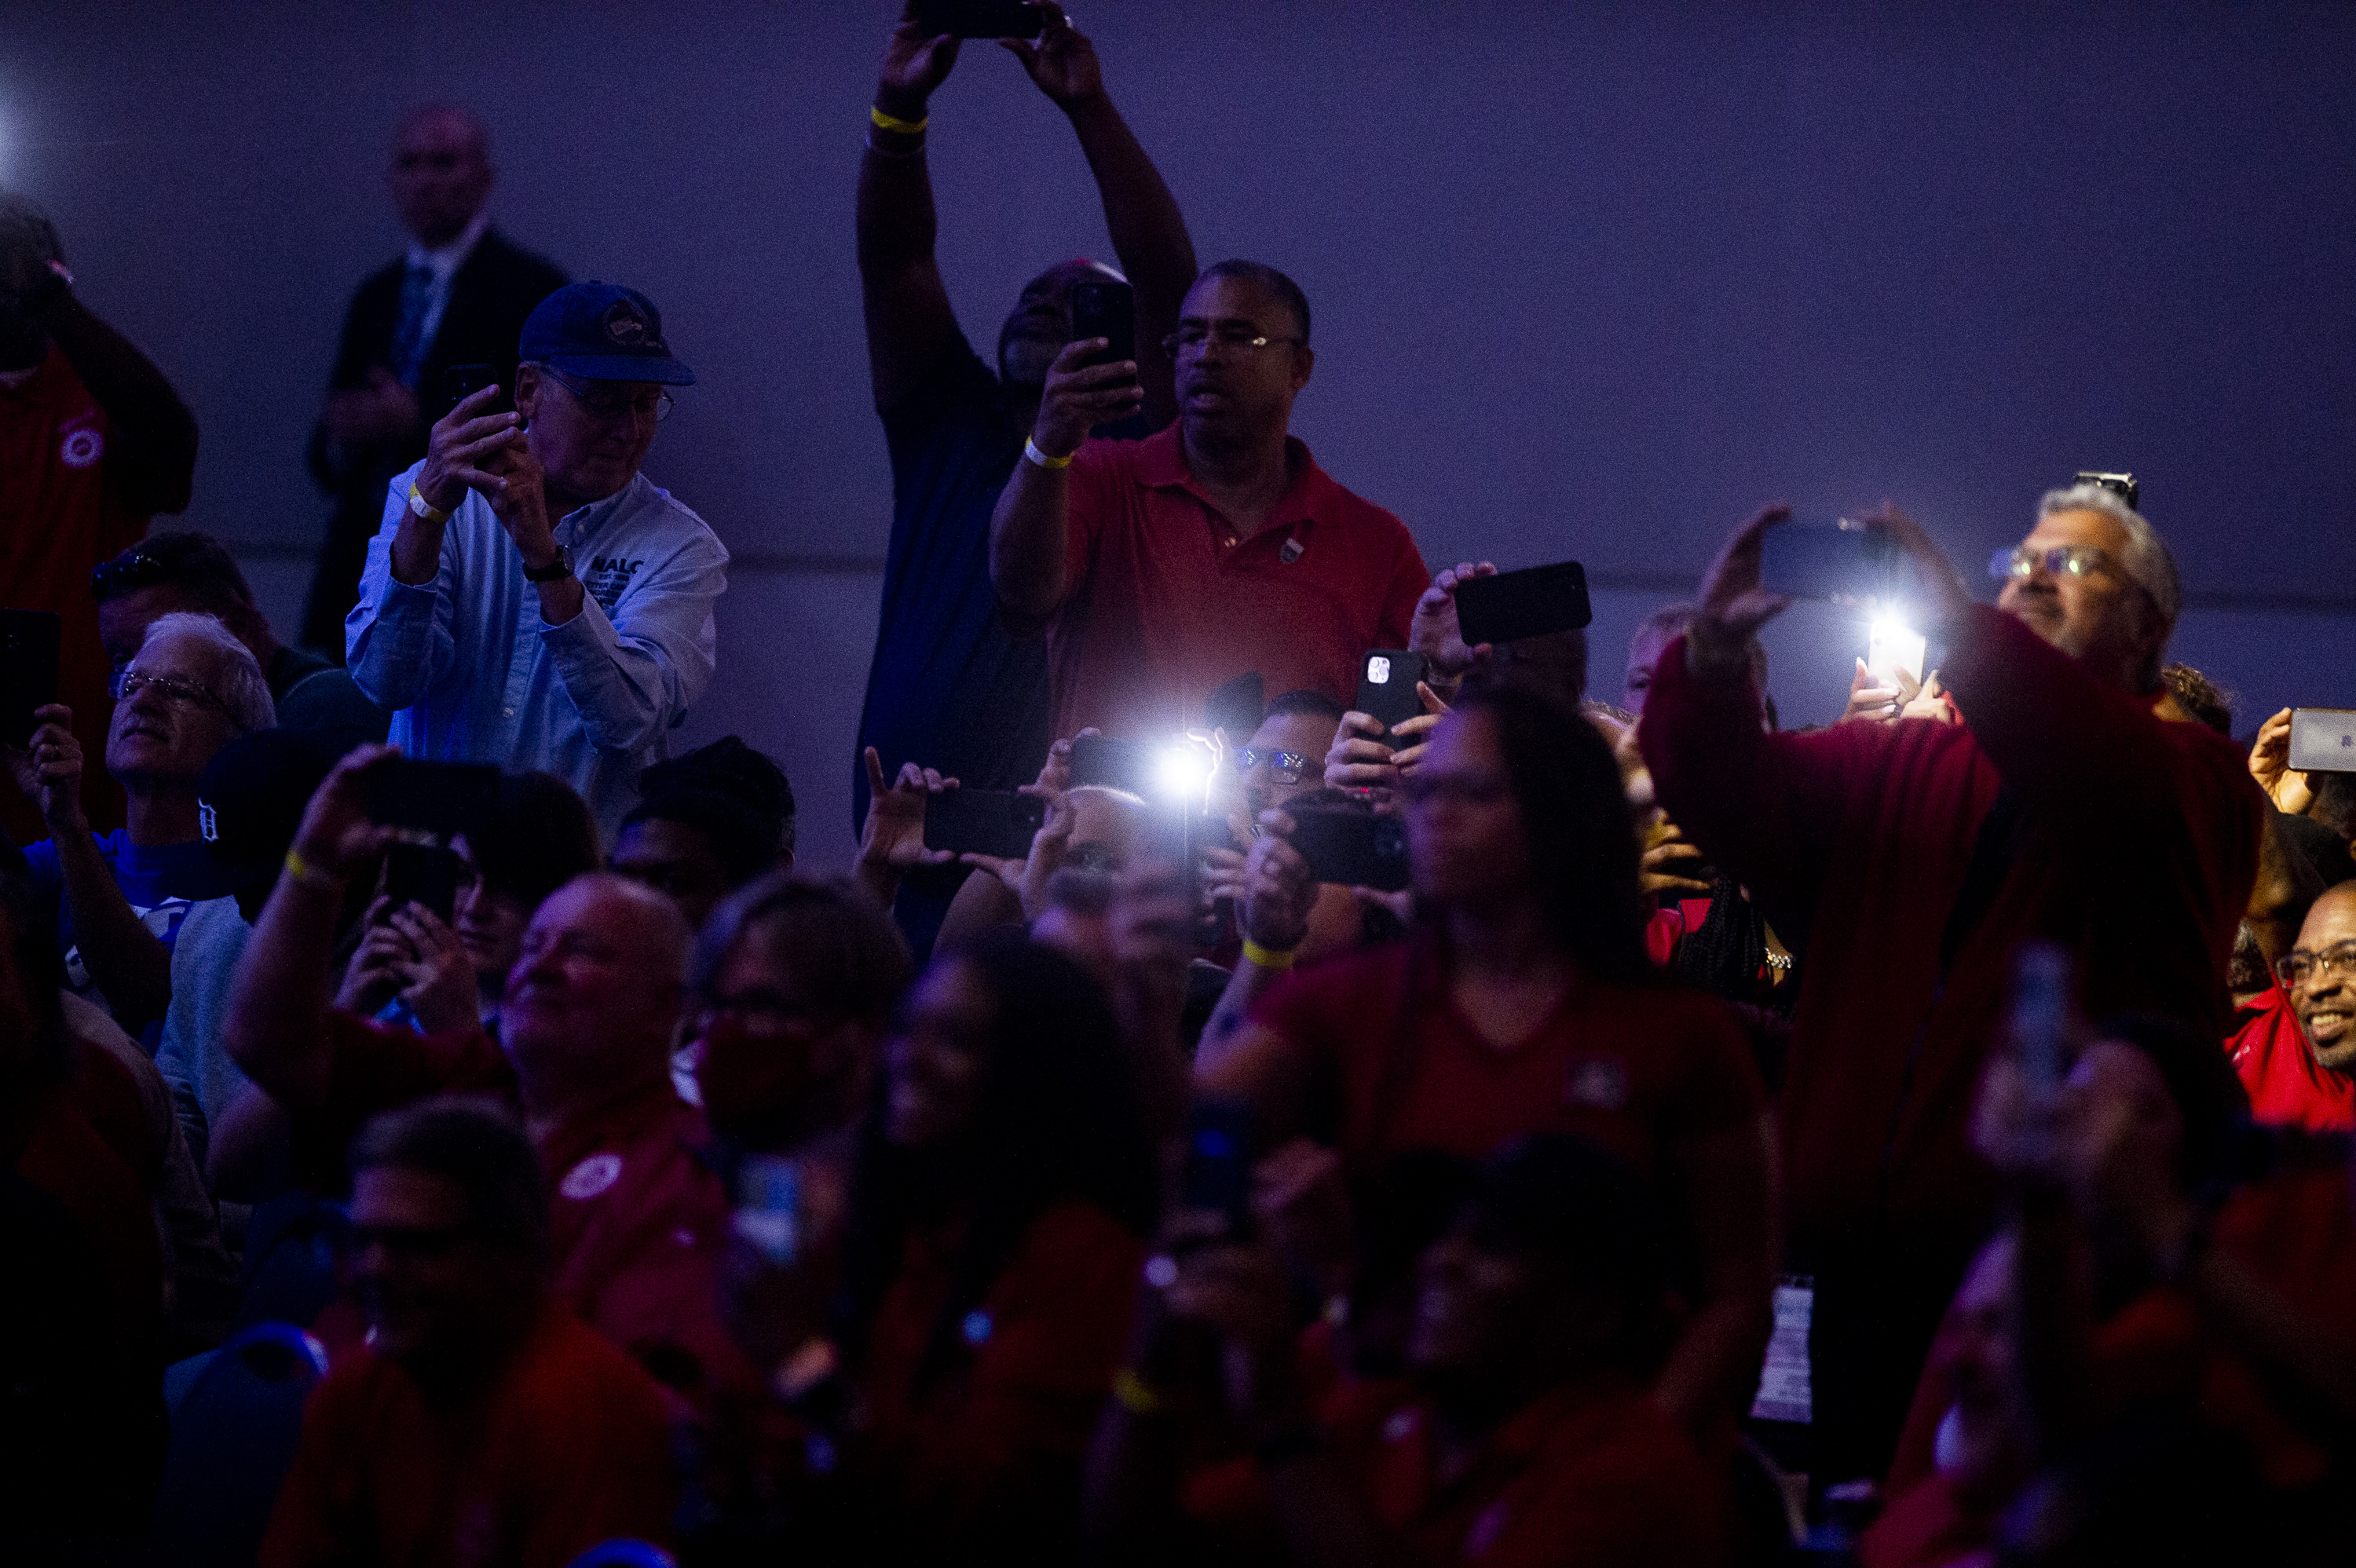 UAW members photograph as U.S. President Joe Biden speaks during the 2022 North American International Auto Show at Huntington Place in Detroit on Wednesday, Sept. 14 2022.